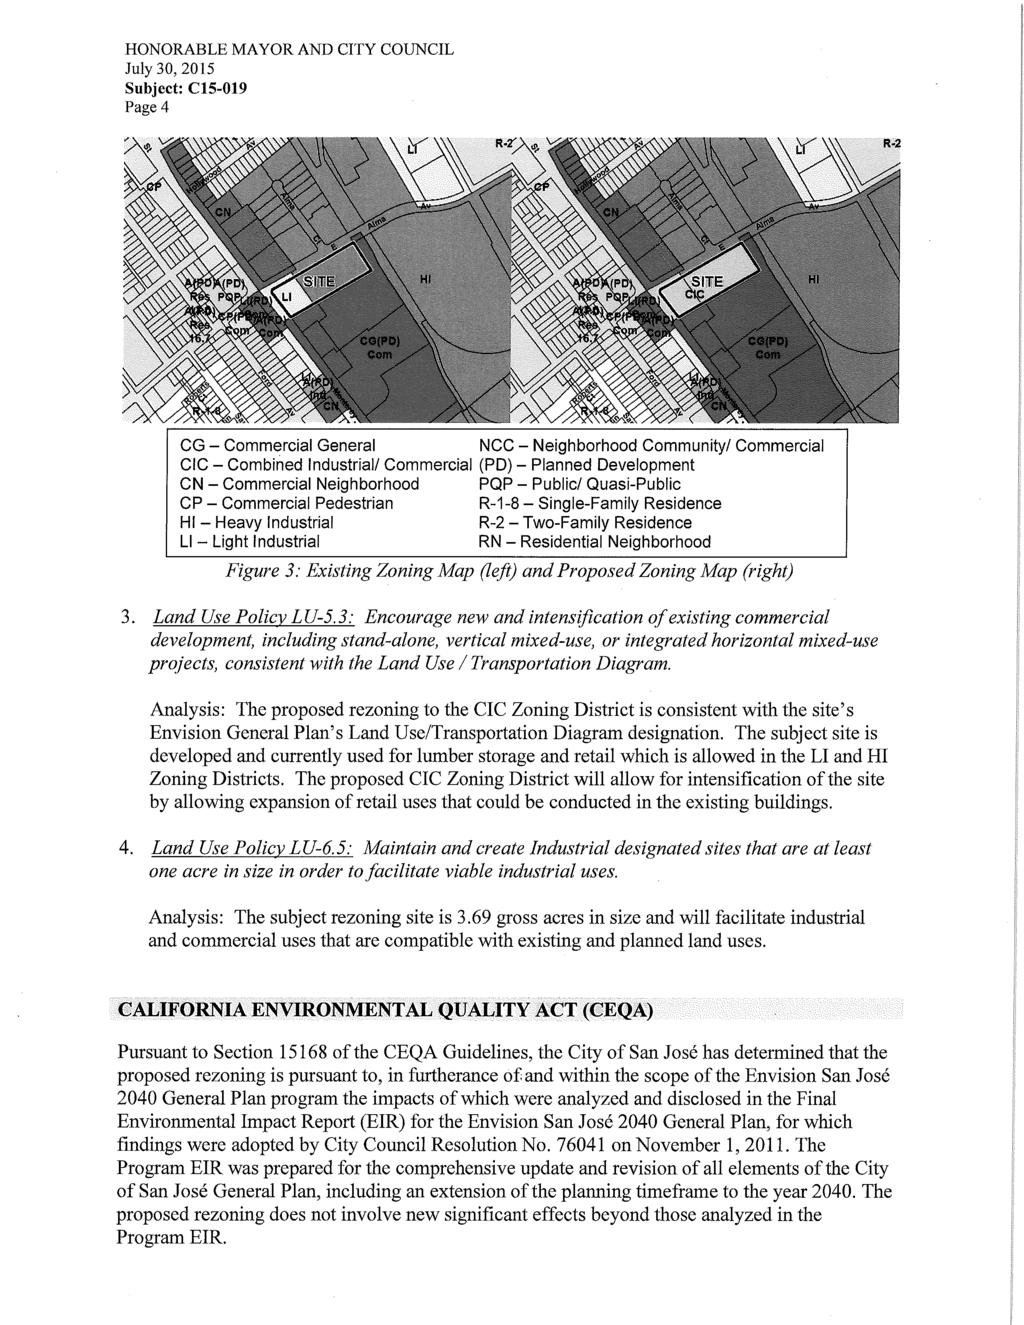 July 30, 2015 Page 4 CG - Commercial General NCC - Neighborhood Community/ Commercial CIC - Combined Industrial/ Commercial (PD) - Planned Development CN - Commercial Neighborhood PQP - Public/